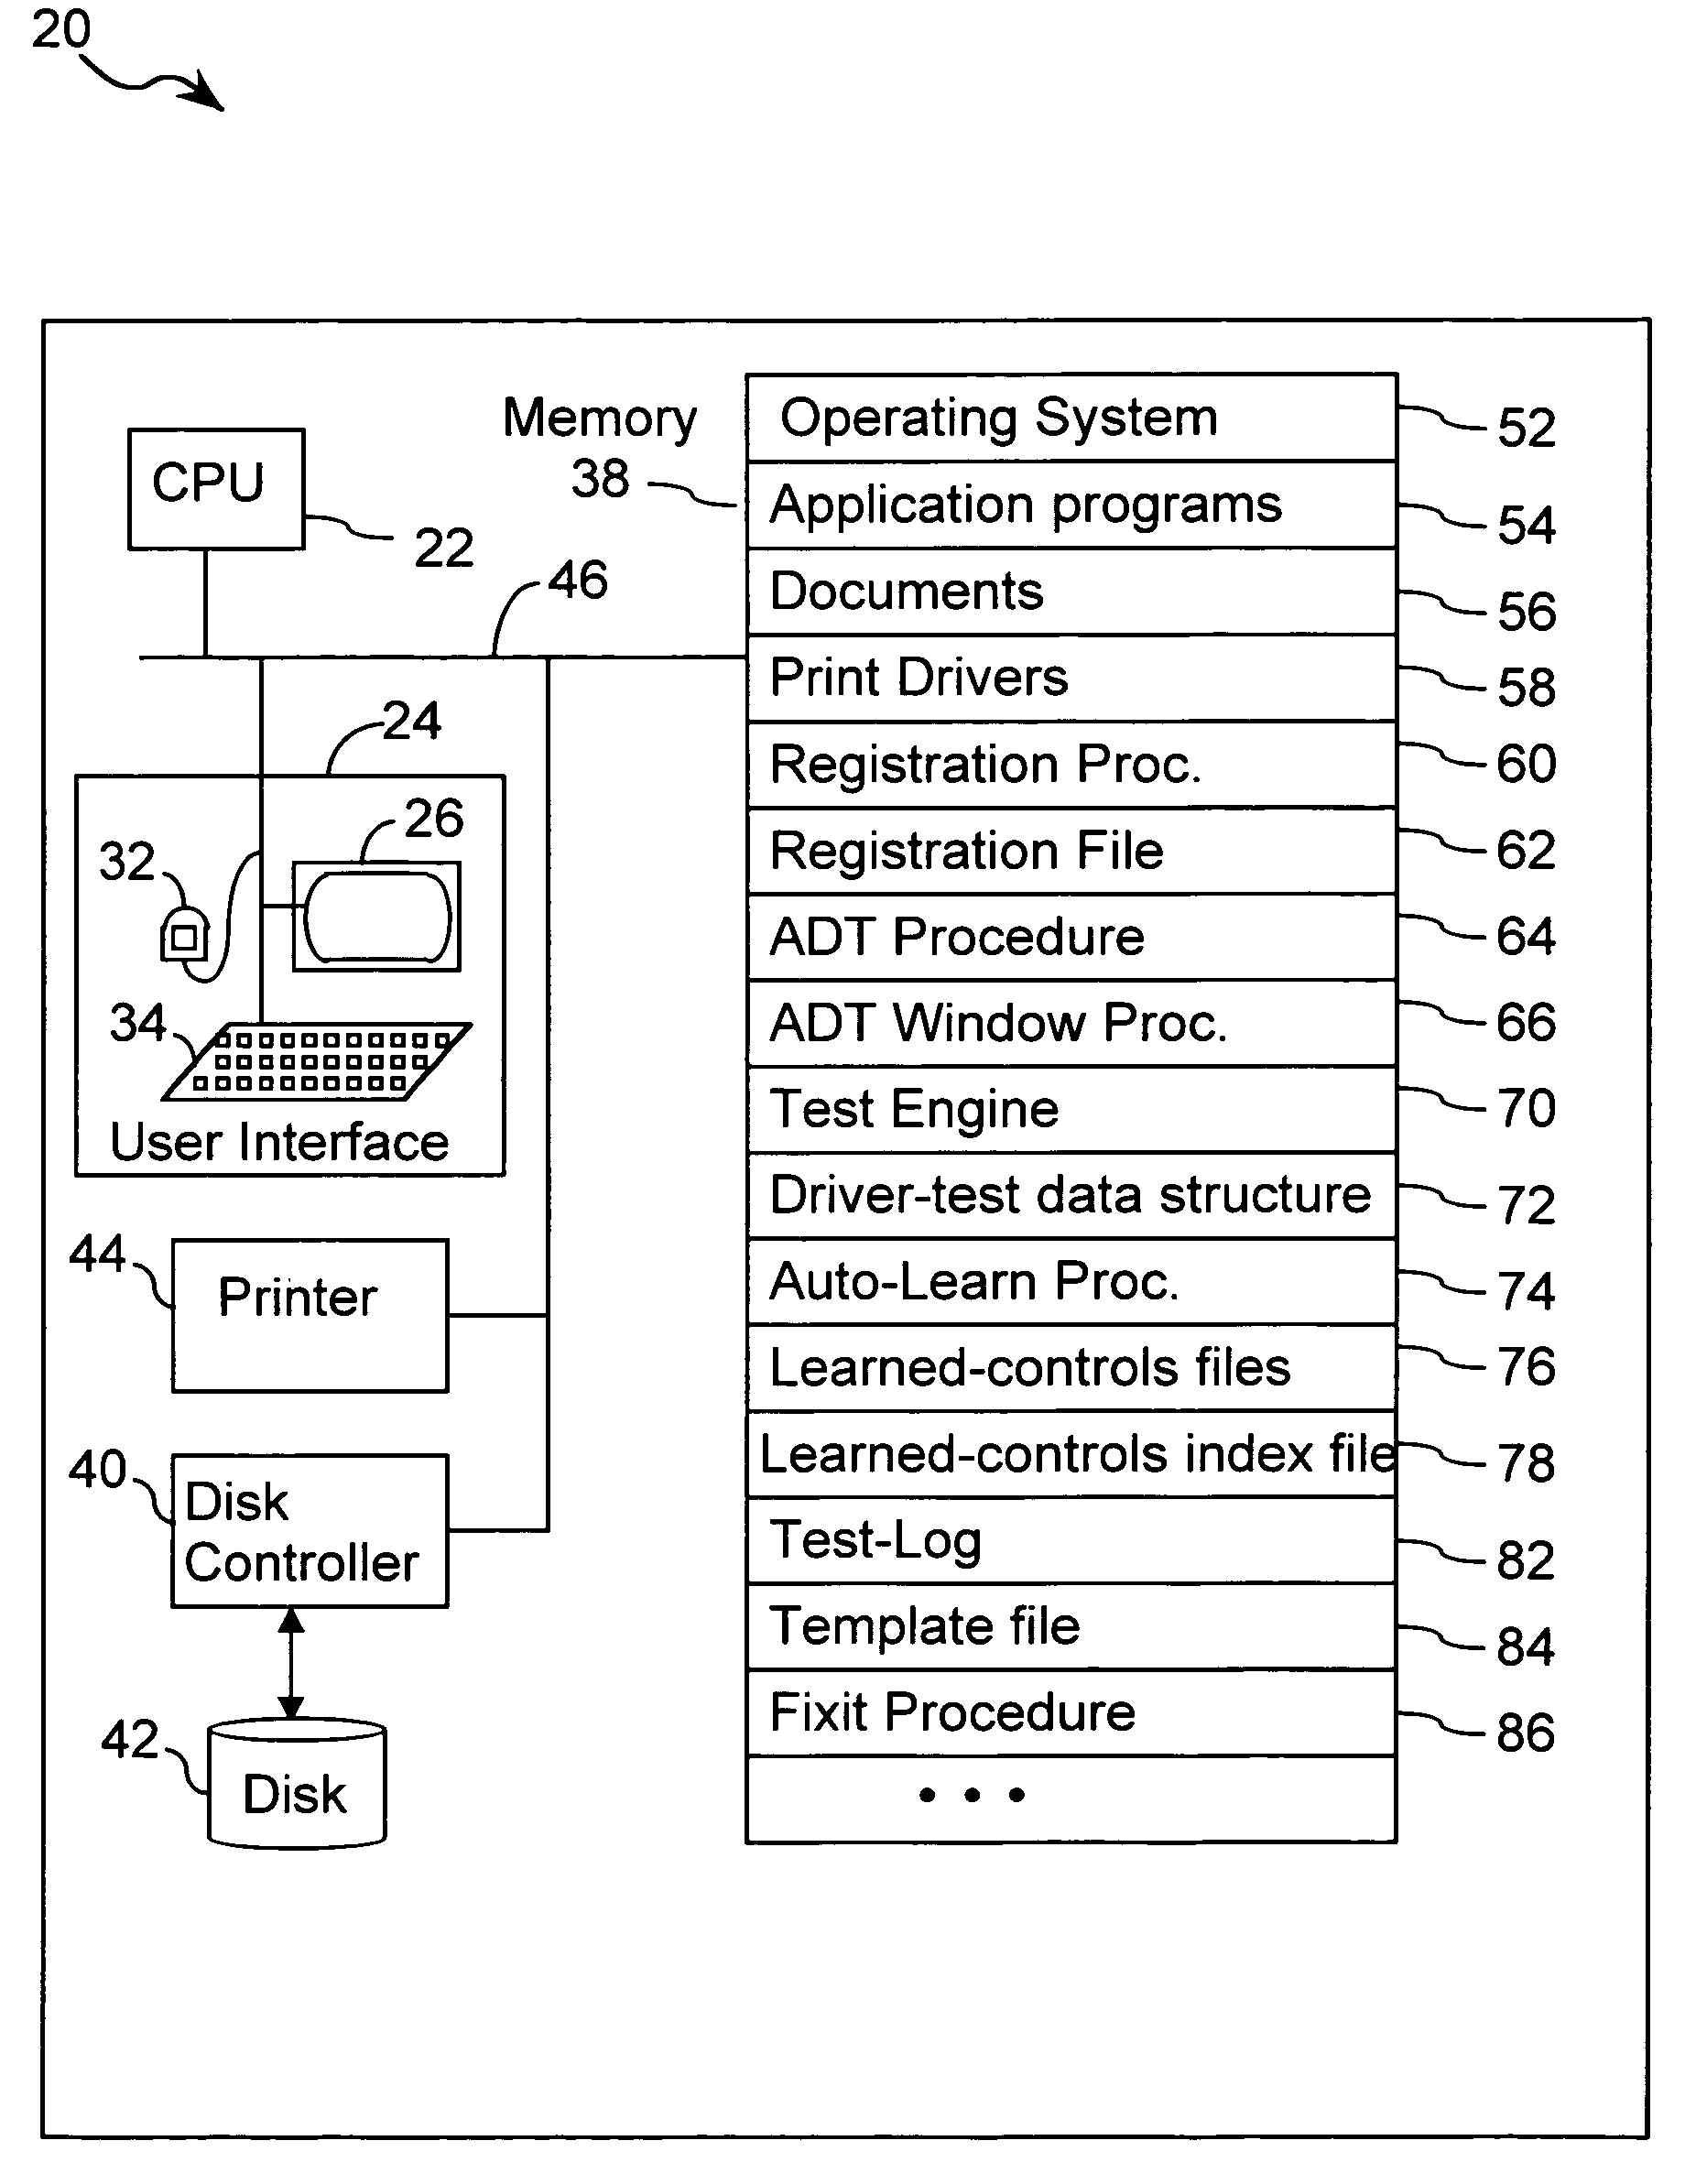 Apparatus and method for automated testing of print drivers in a computer system